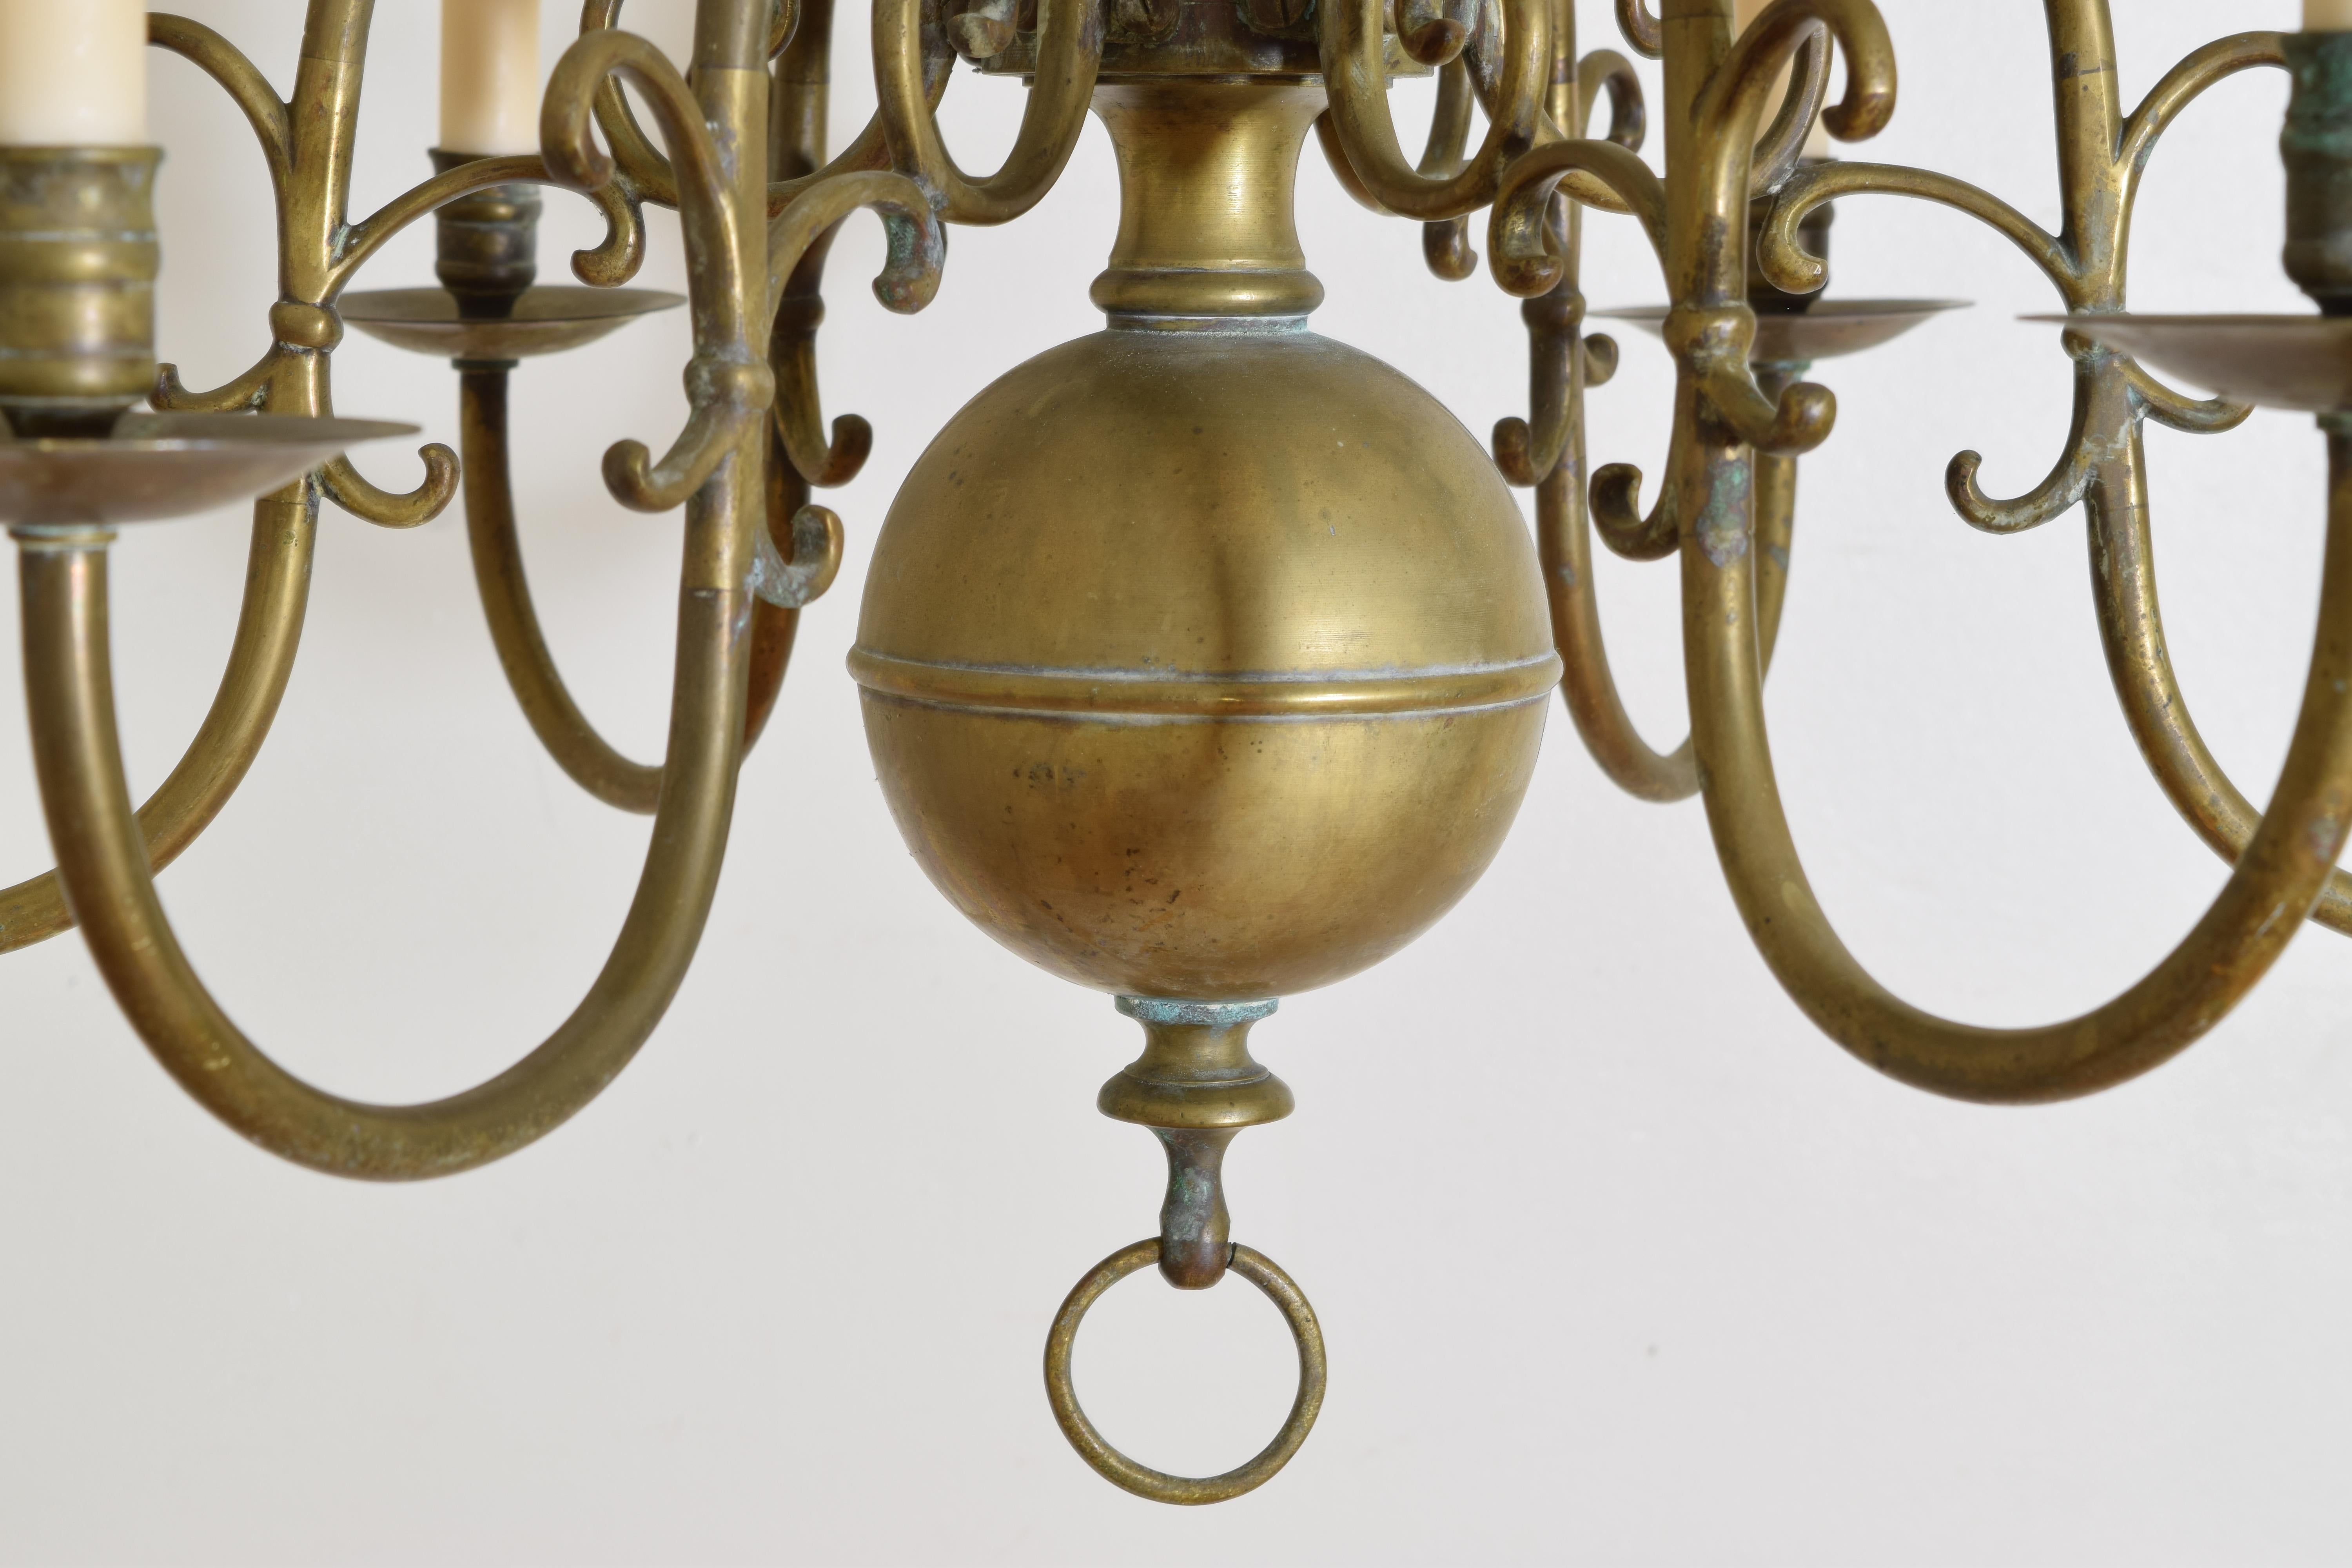 Dutch or French Patinated Brass 2-Tier 12-Light Chandelier, 2nd half 19th cen. For Sale 4